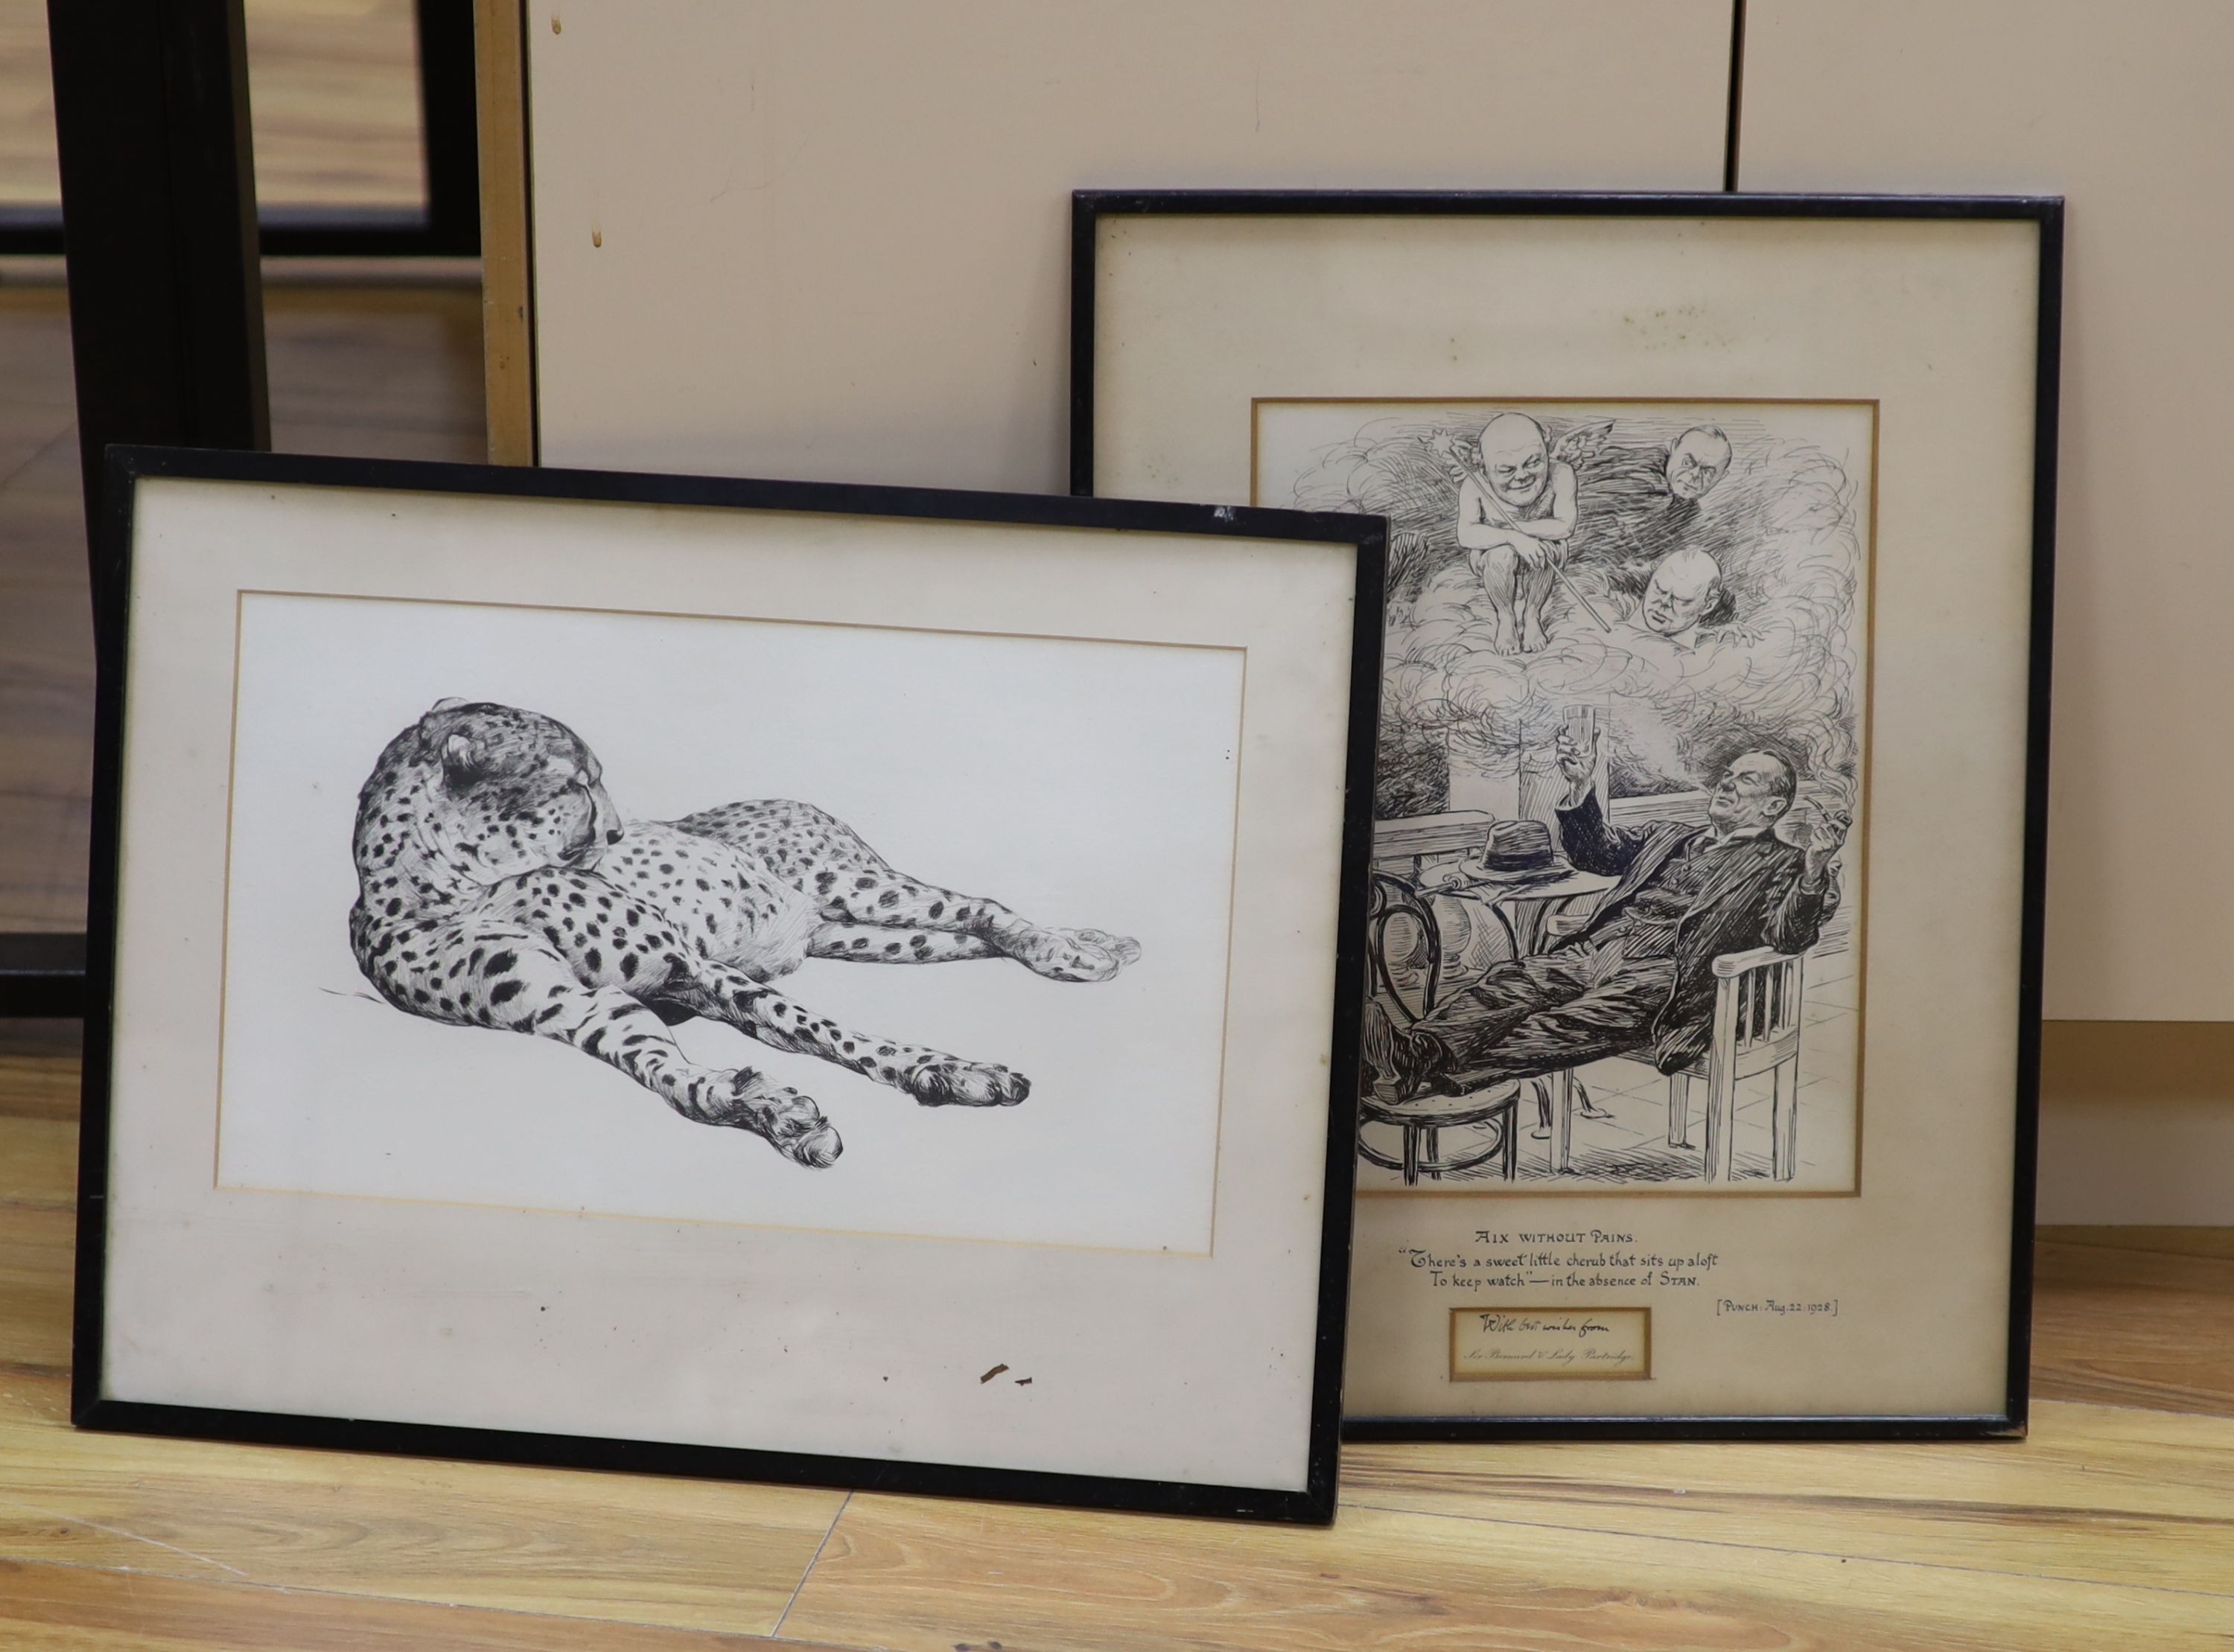 Bernard Partridge (1861-1945), pen and ink, Punch cartoon from 1928, 'Aix without pains', signed, 34 x 26cm and a print of a leopard, 26 x 43cm